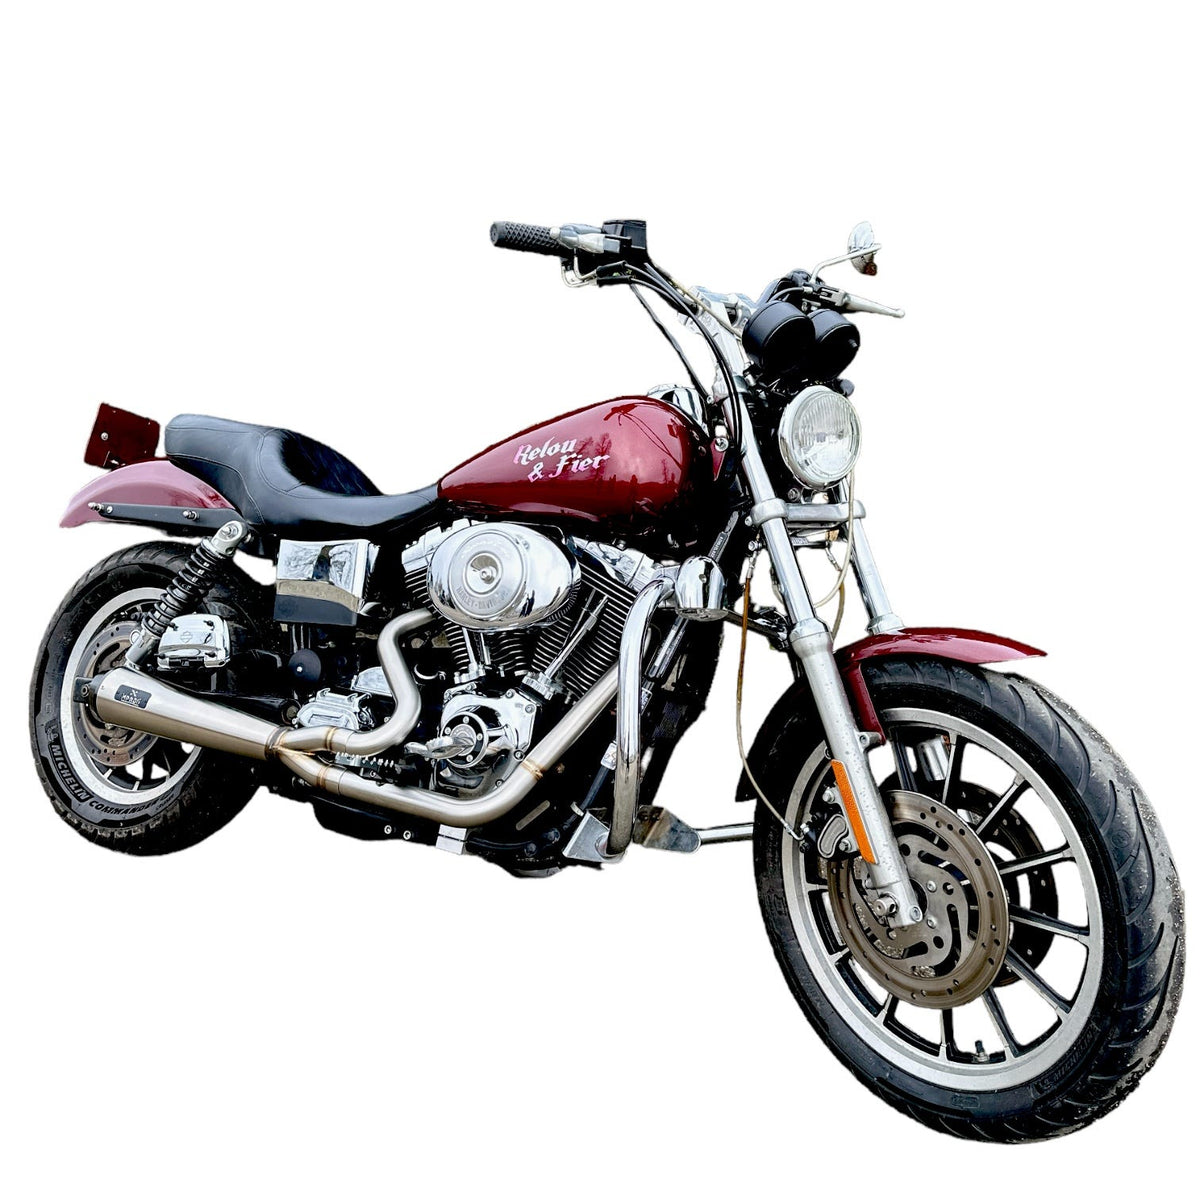 MPRDS 2:1 Exhaust System EURO 2 - 99-05 Dyna